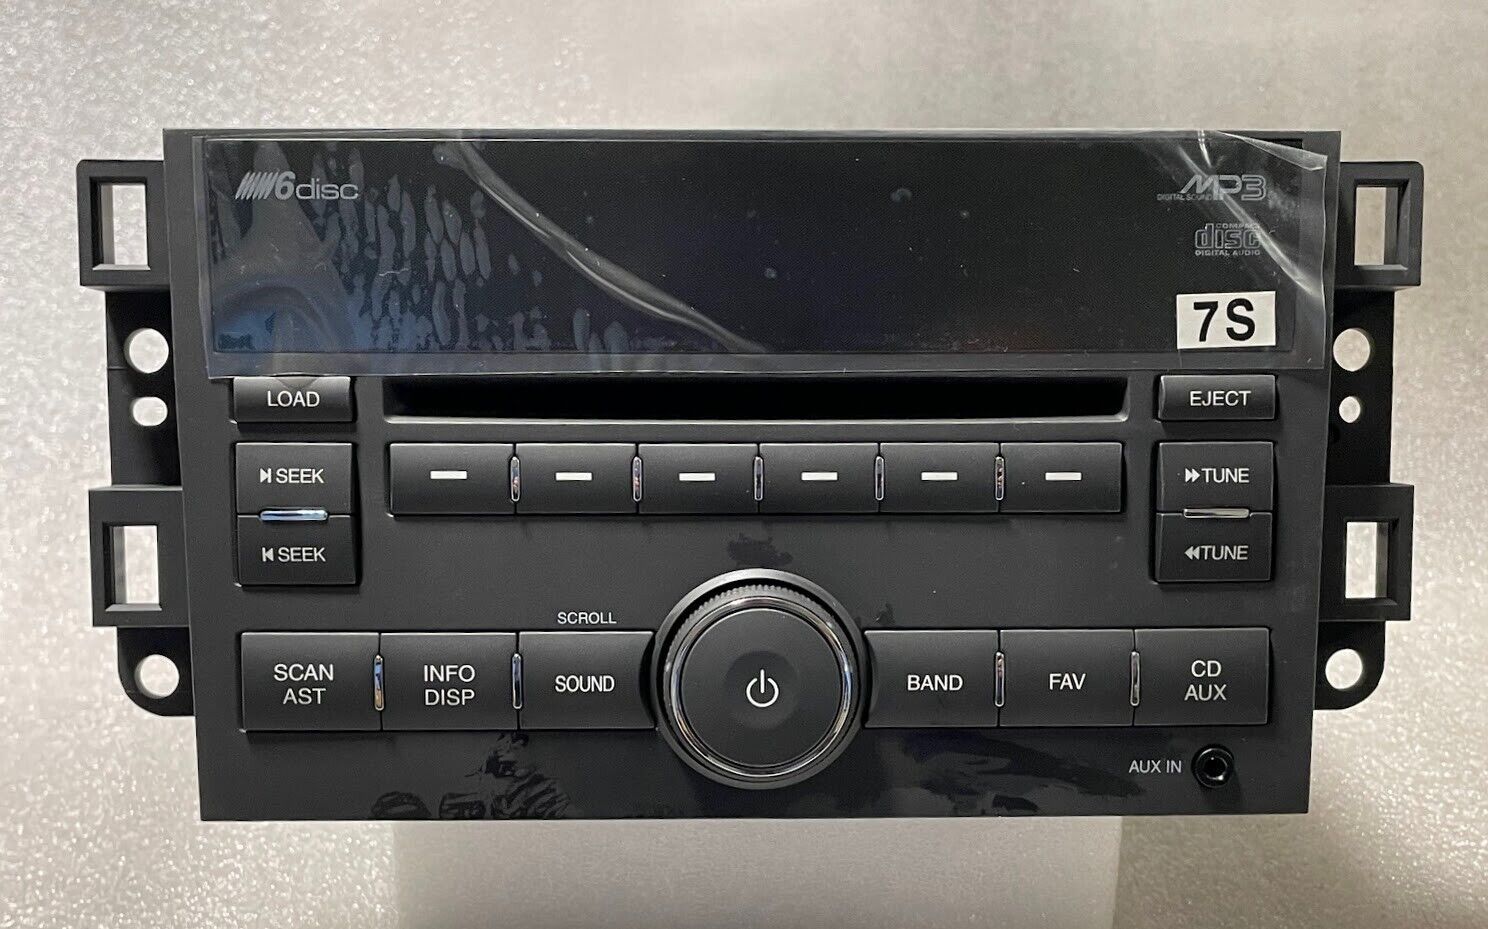 Primary image for 2008-2010 Chevy Aveo radio OEM CD6 stereo. Factory original. Never installed